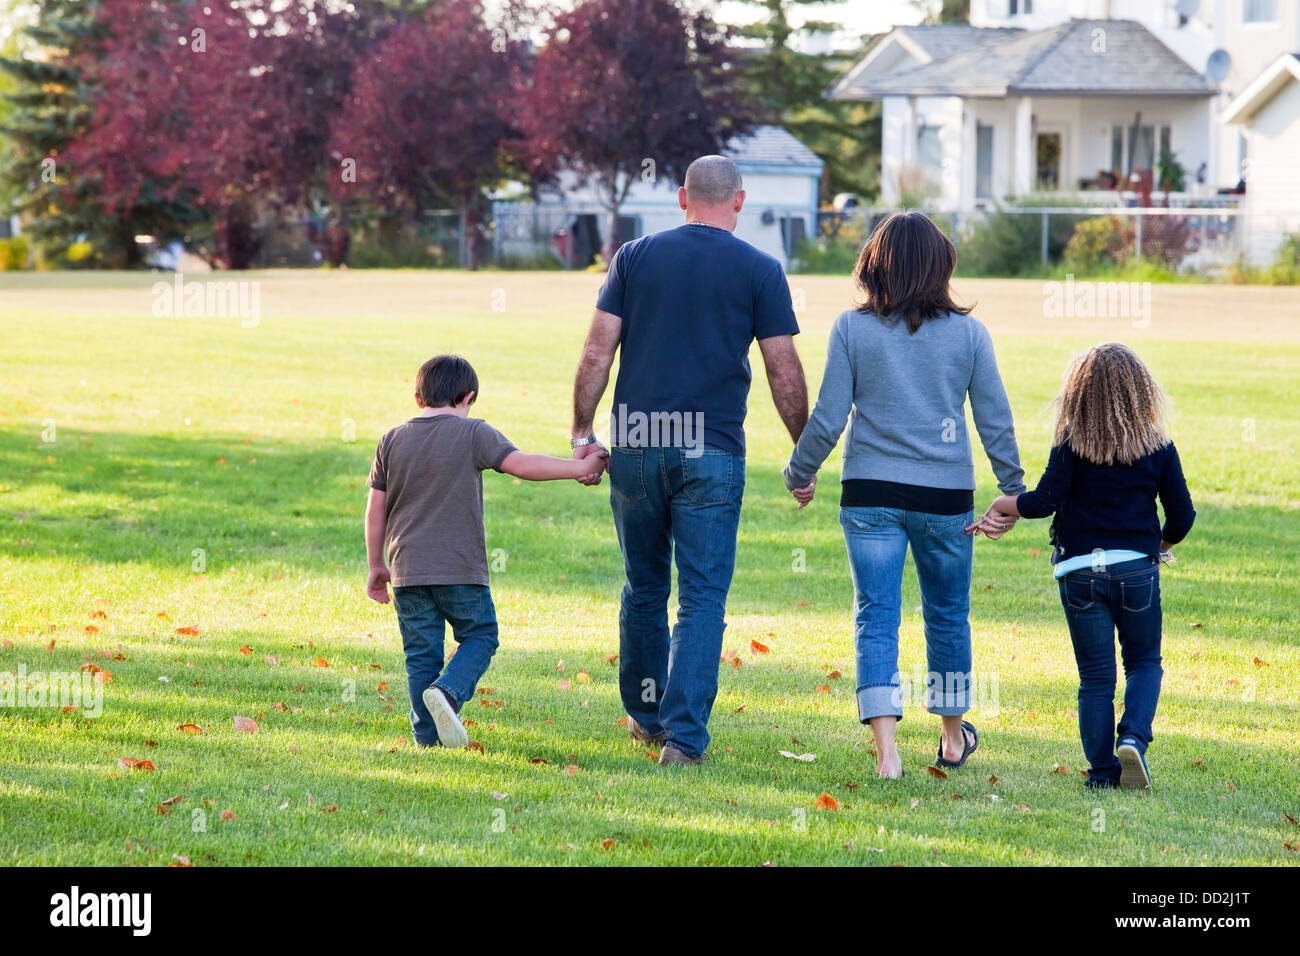 Family Walking Together In A Park; Beaumont, Alberta, Canada Stock Photo